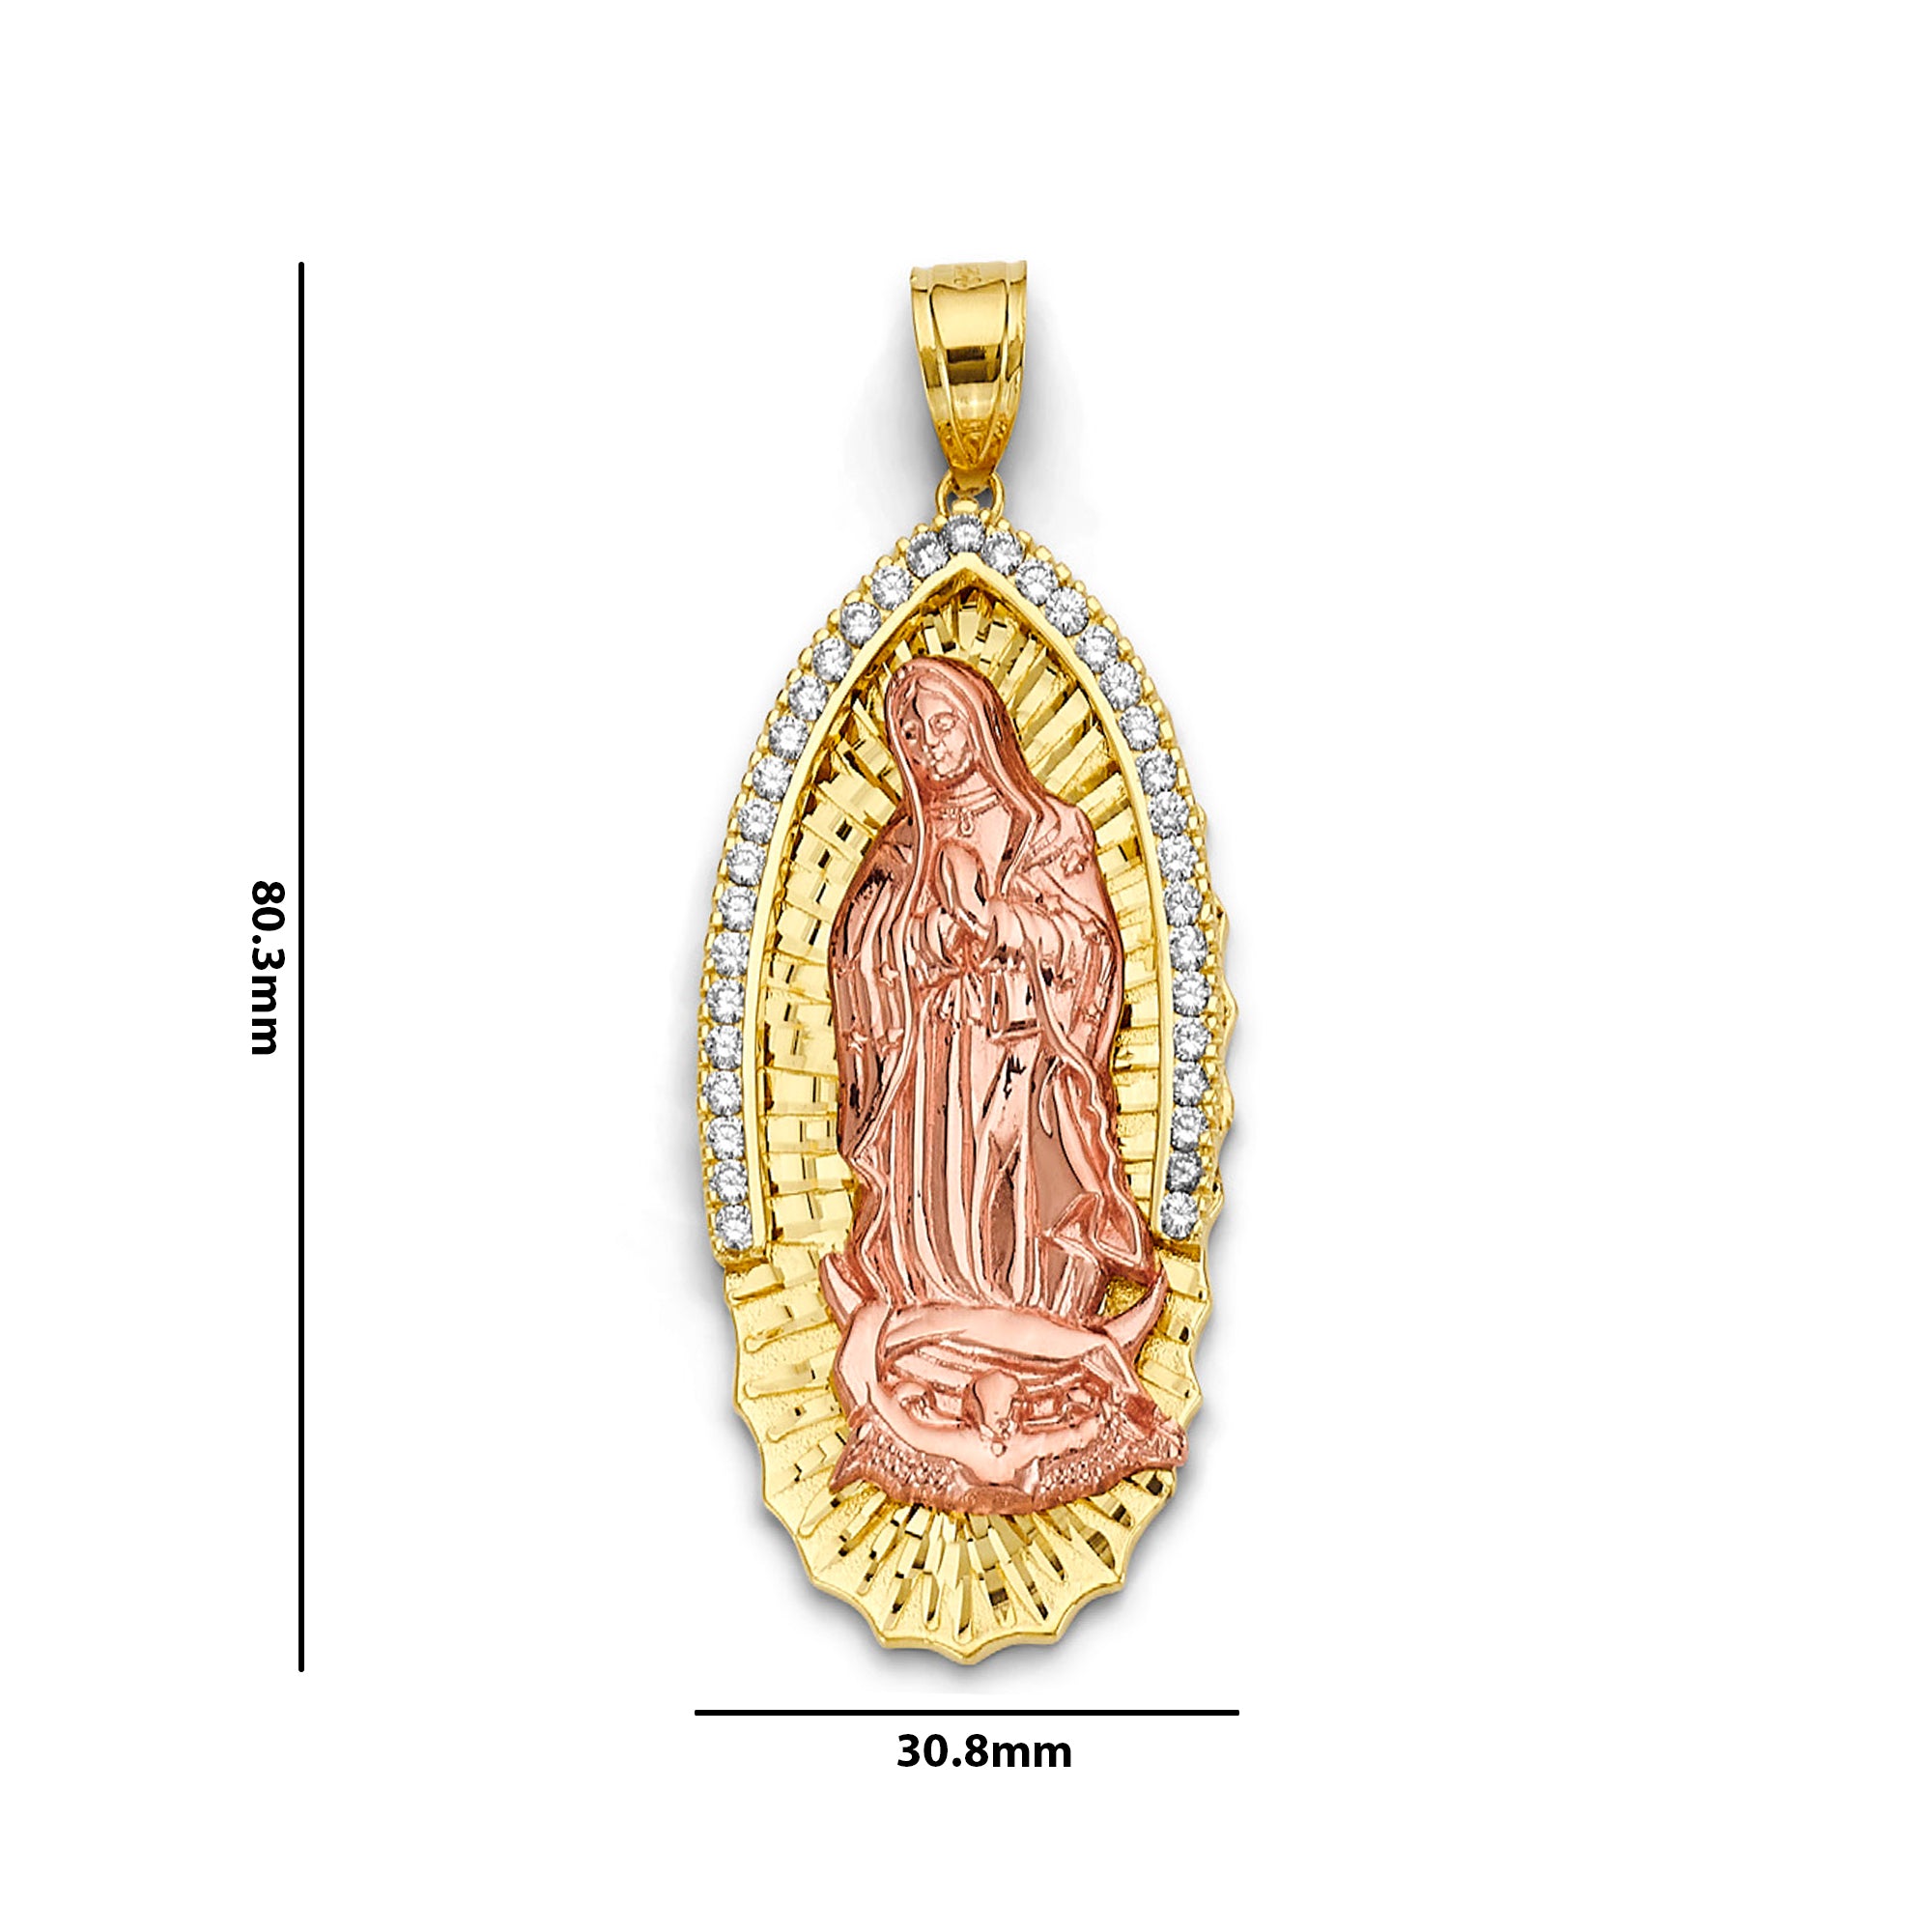 Dual Tone Virgin Mary Pendant Necklace in 14K Yellow Gold (35.0g) with Measurement